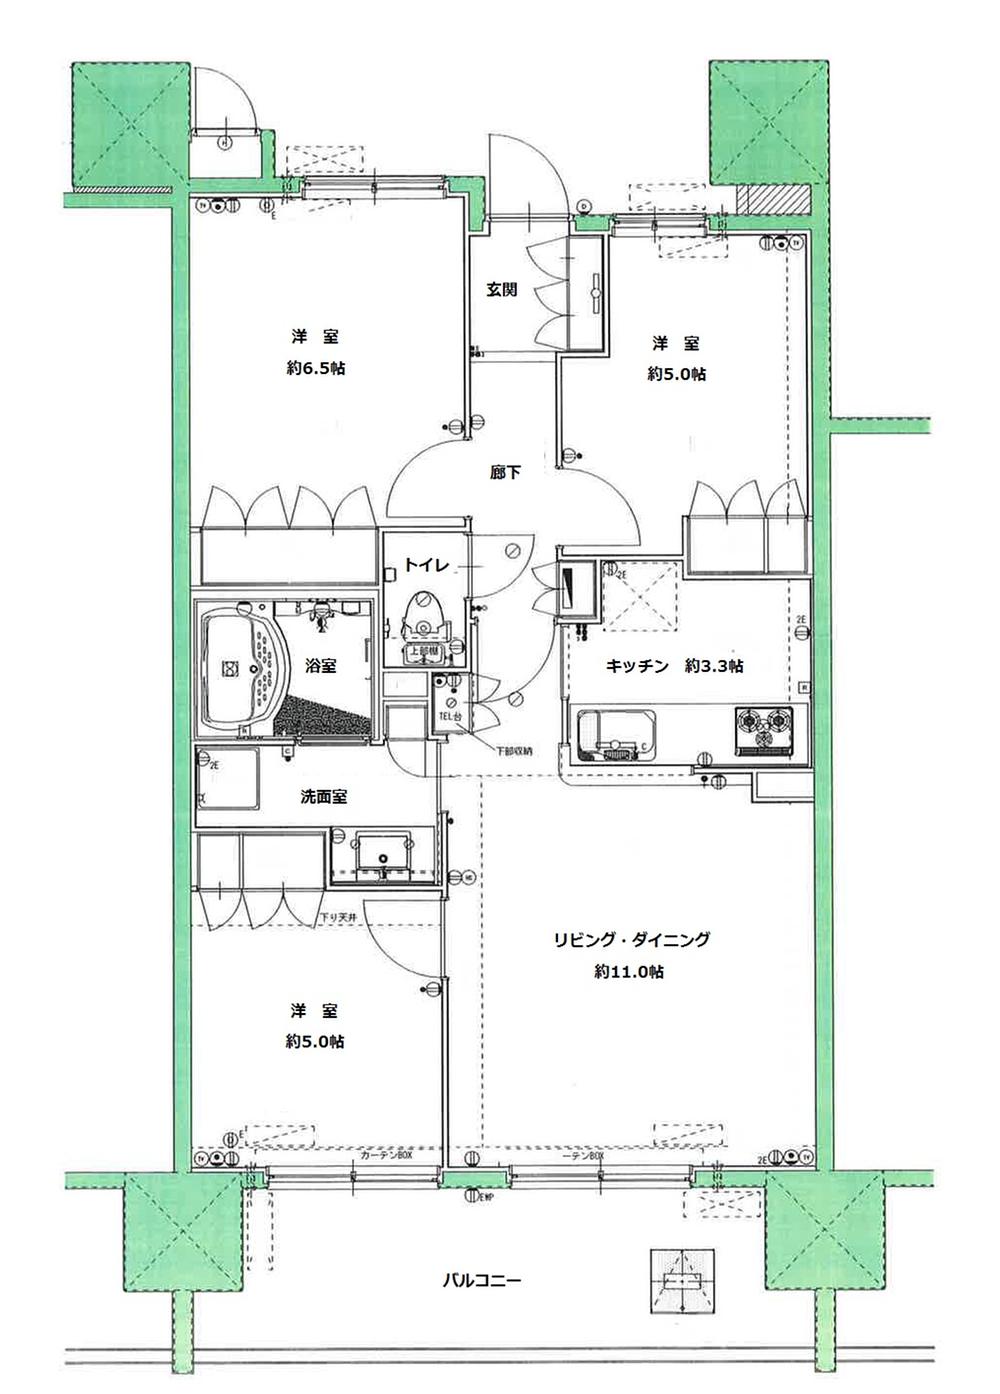 Floor plan. 3LDK, Price 18.4 million yen, Occupied area 66.68 sq m , Balcony area 11.88 sq m south Western-style balcony to enjoy the charm of the dwelling unit plan